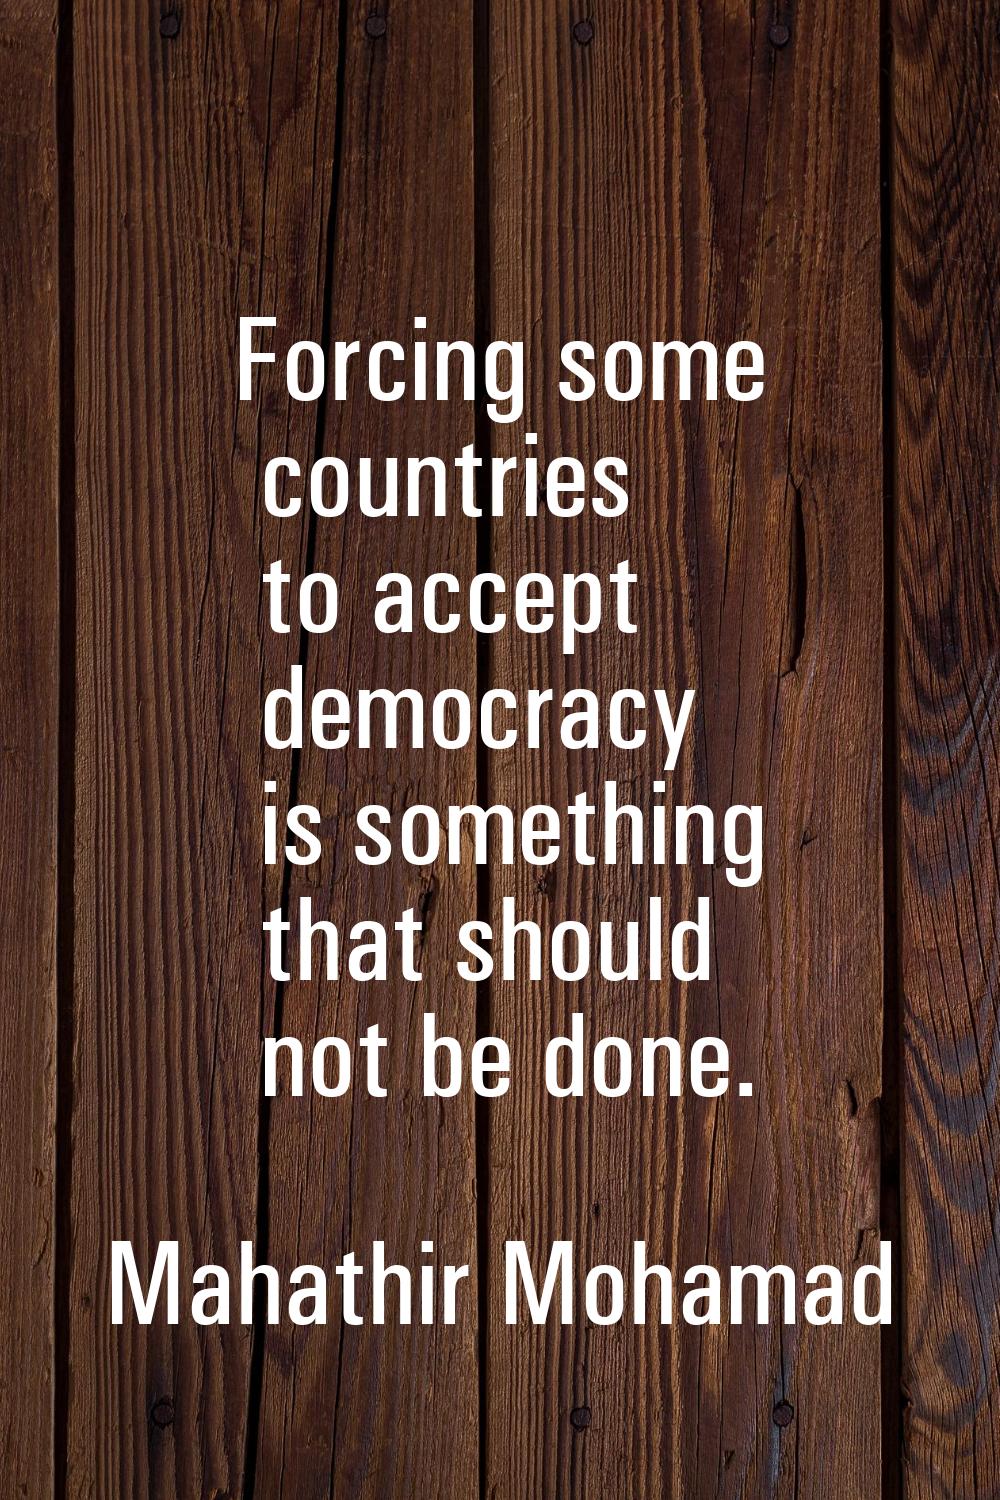 Forcing some countries to accept democracy is something that should not be done.